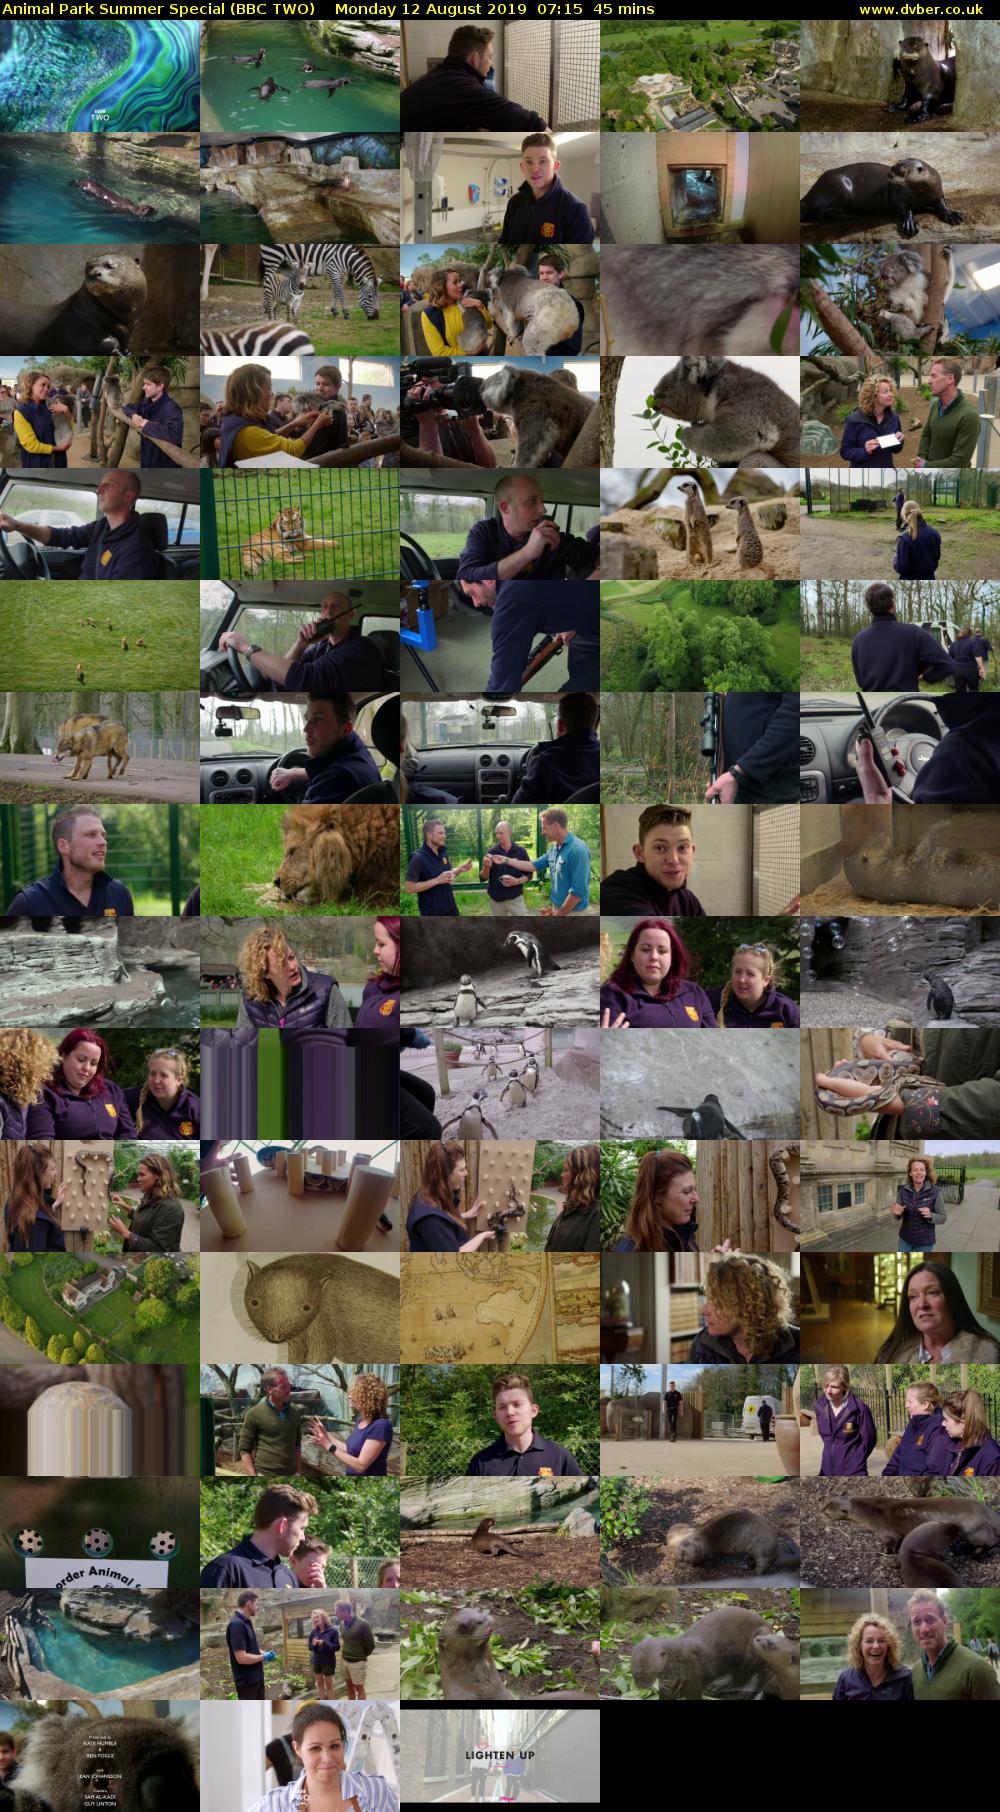 Animal Park Summer Special (BBC TWO) Monday 12 August 2019 07:15 - 08:00